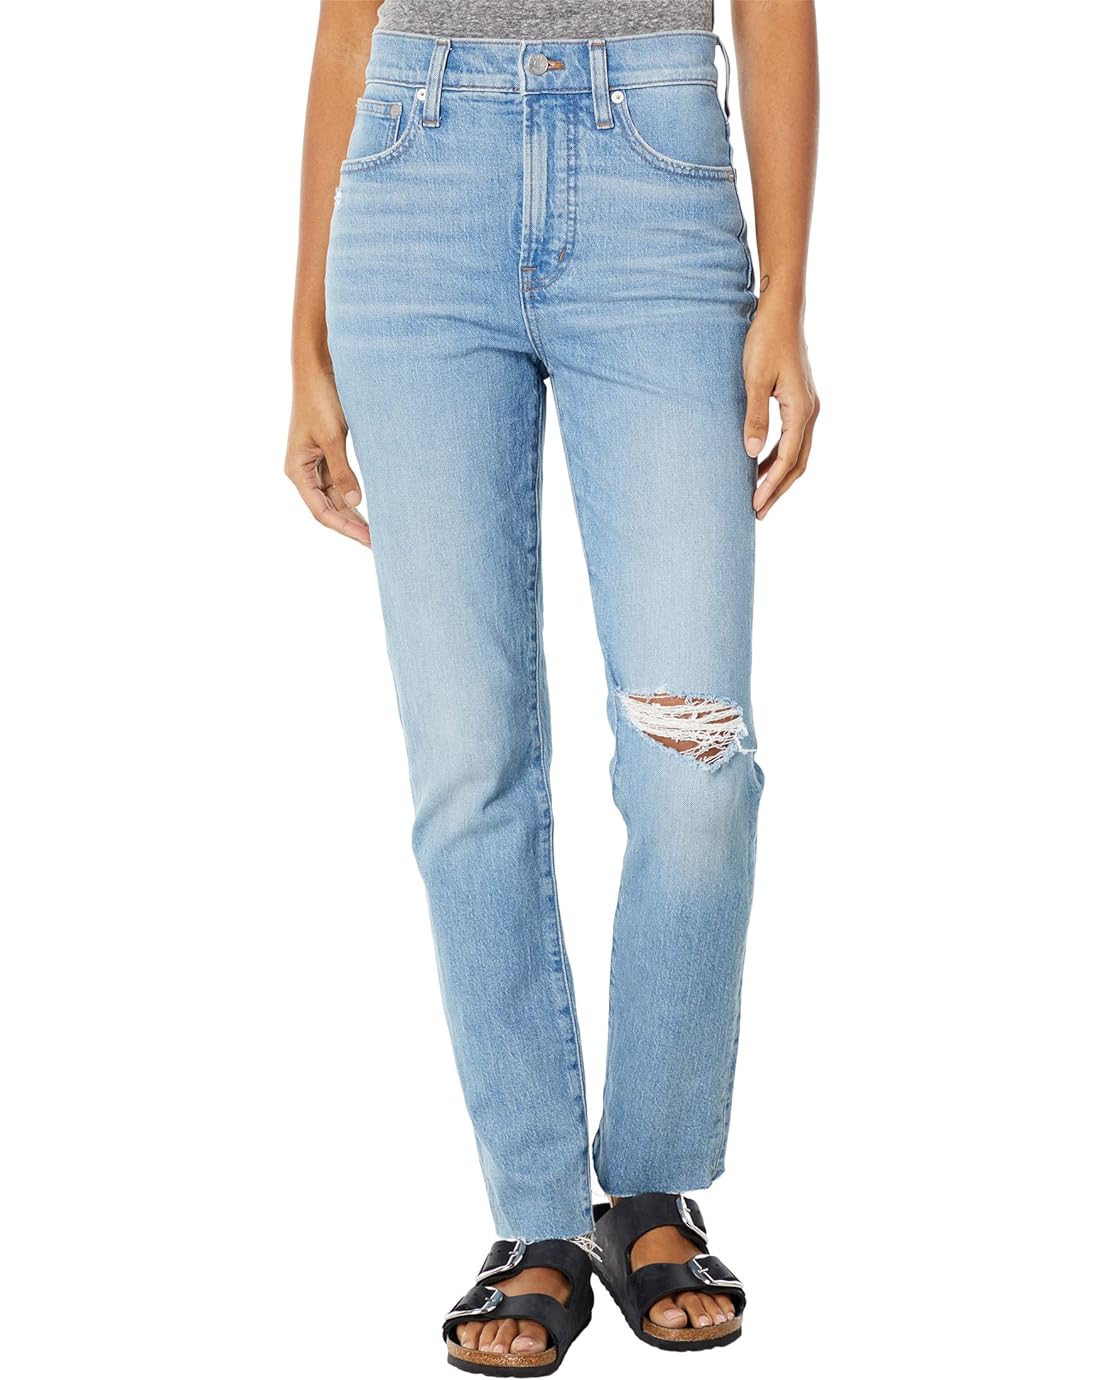 Madewell The Tall Perfect Vintage Jean in Coney Wash: Destroyed Edition